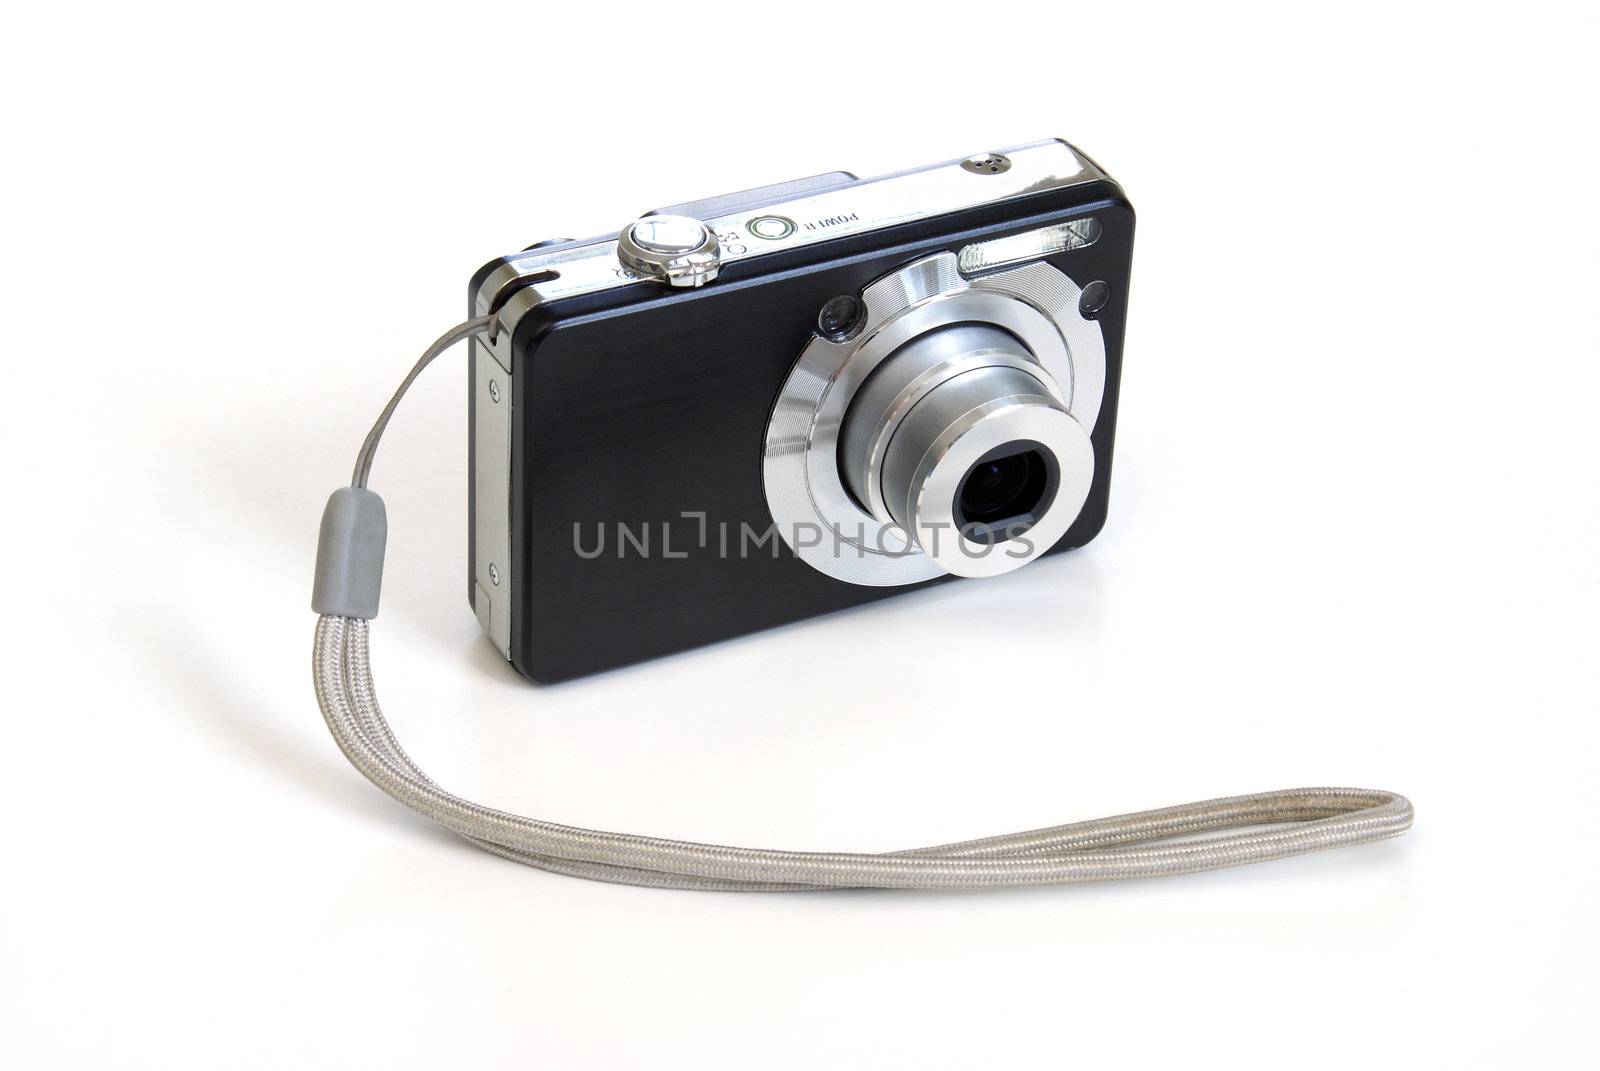 An isolated digital camera on white background.